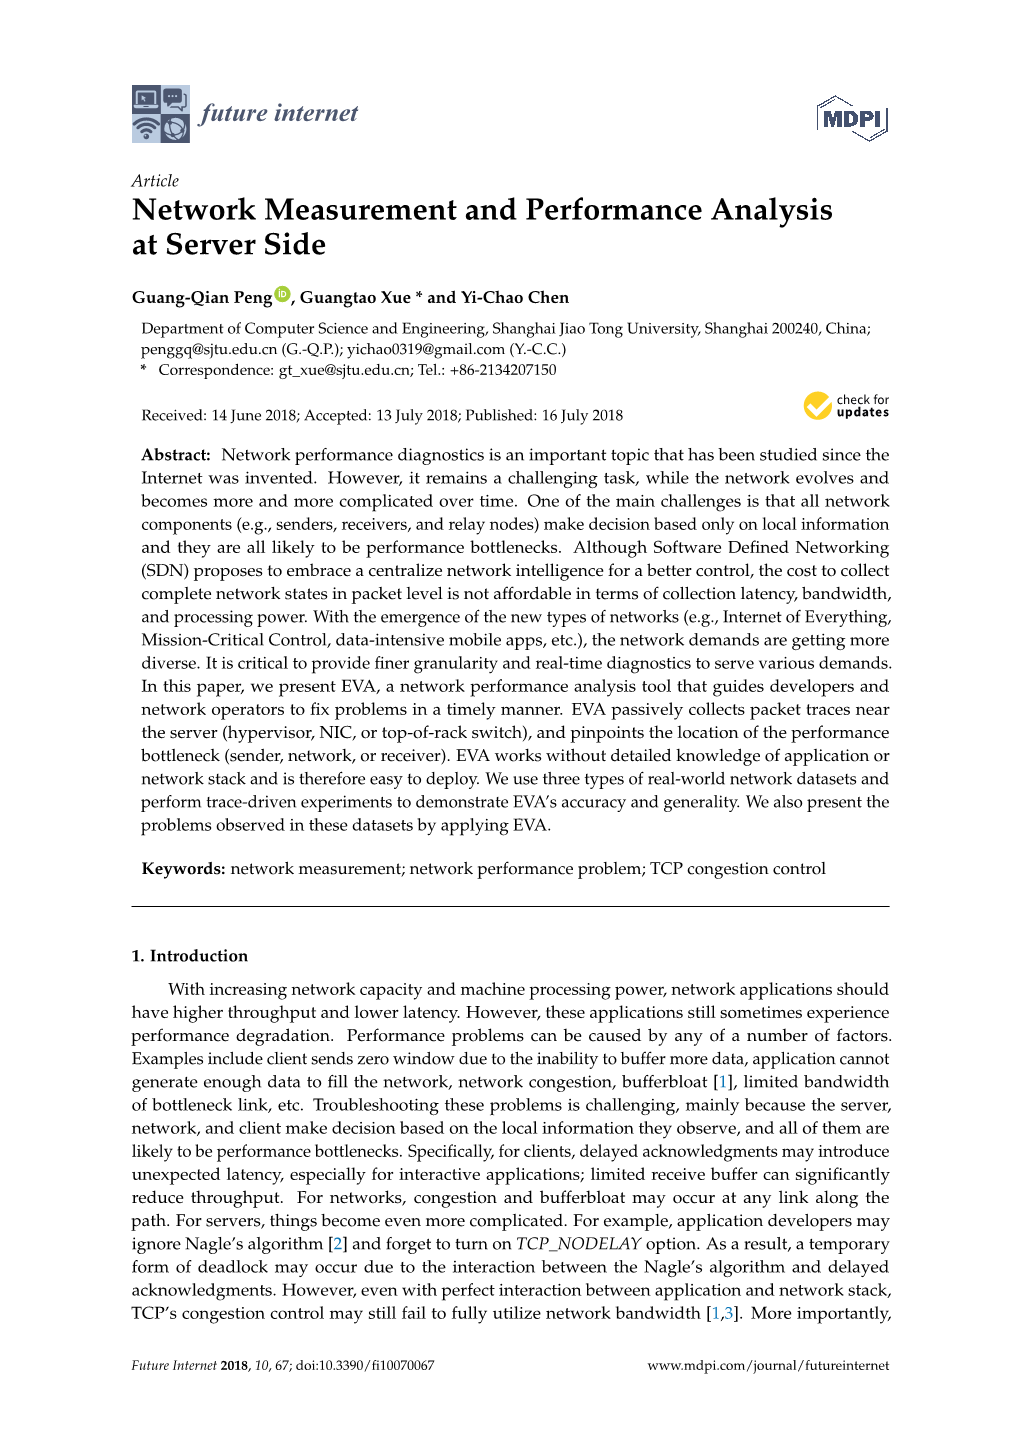 Network Measurement and Performance Analysis at Server Side